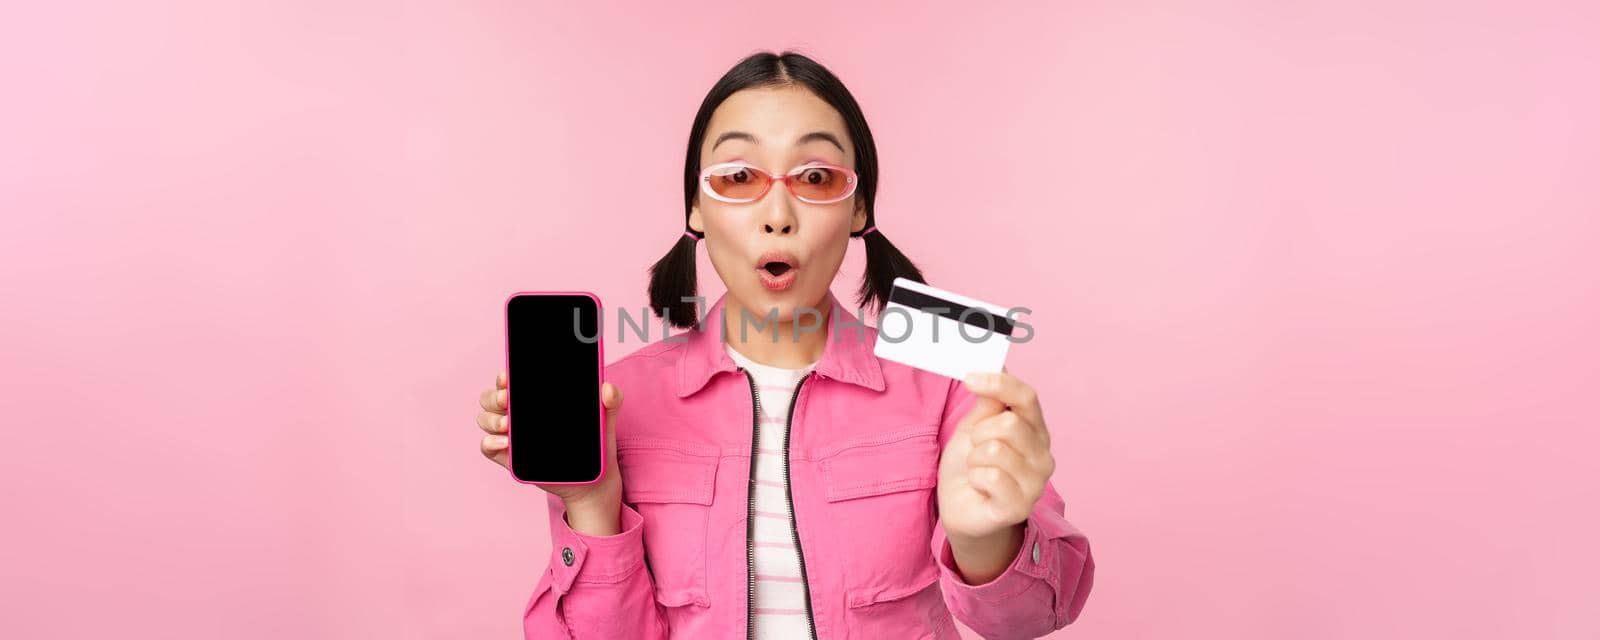 Asian girl shows mobile phone screen and credit card, reacts surprised at camera, gasping impressed, standing over pink background, online shopping concept.